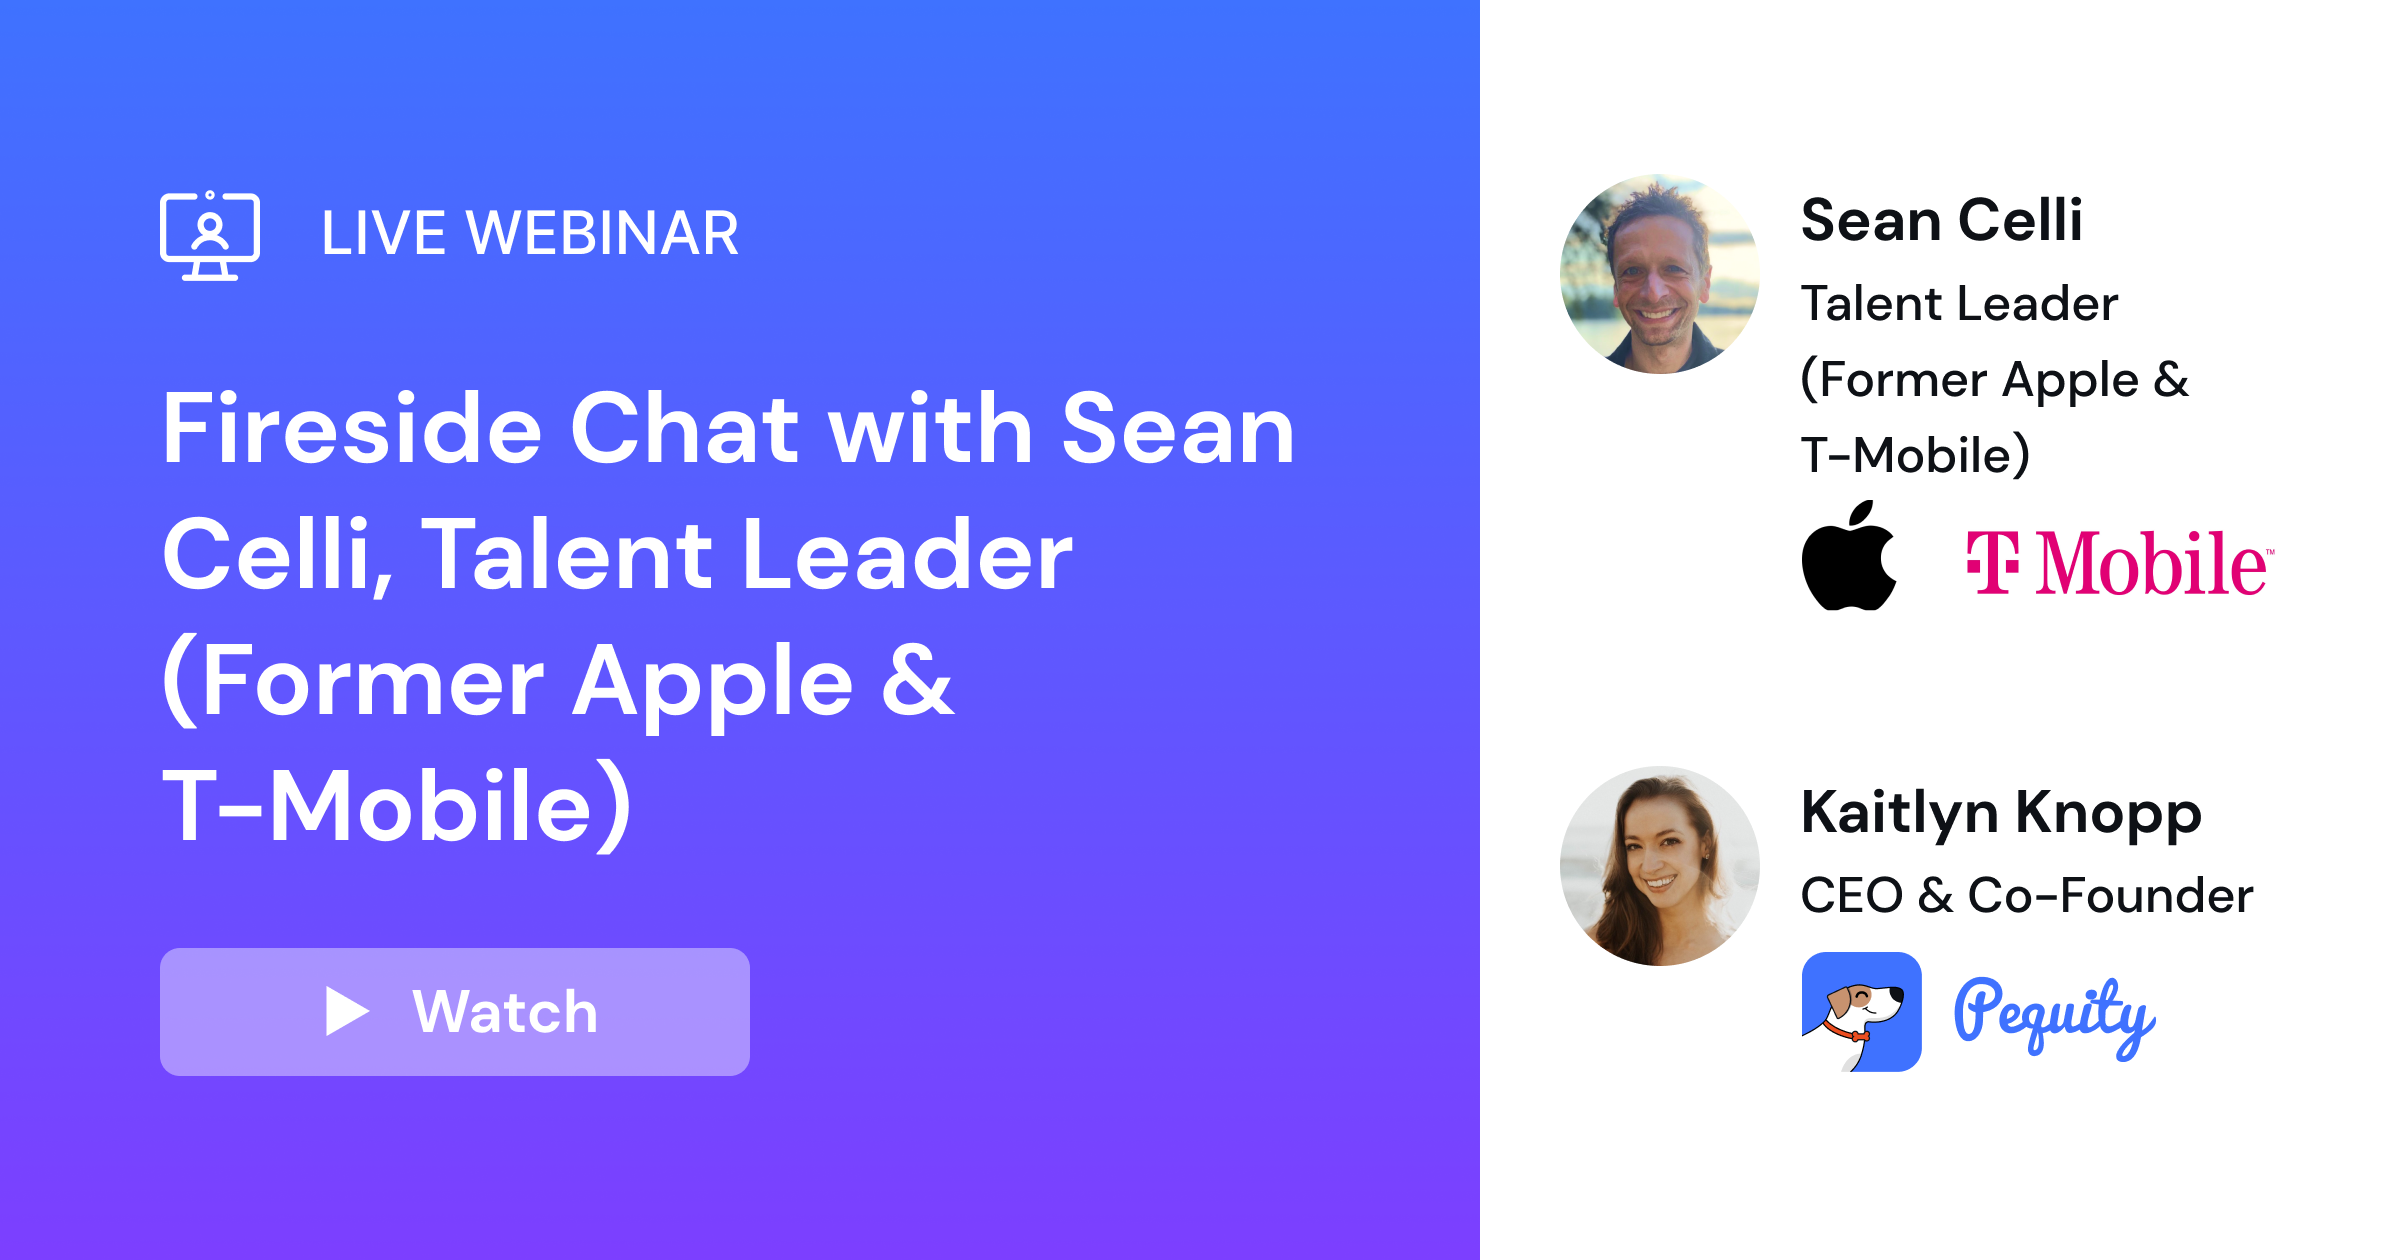 Fireside chat with Sean Celli